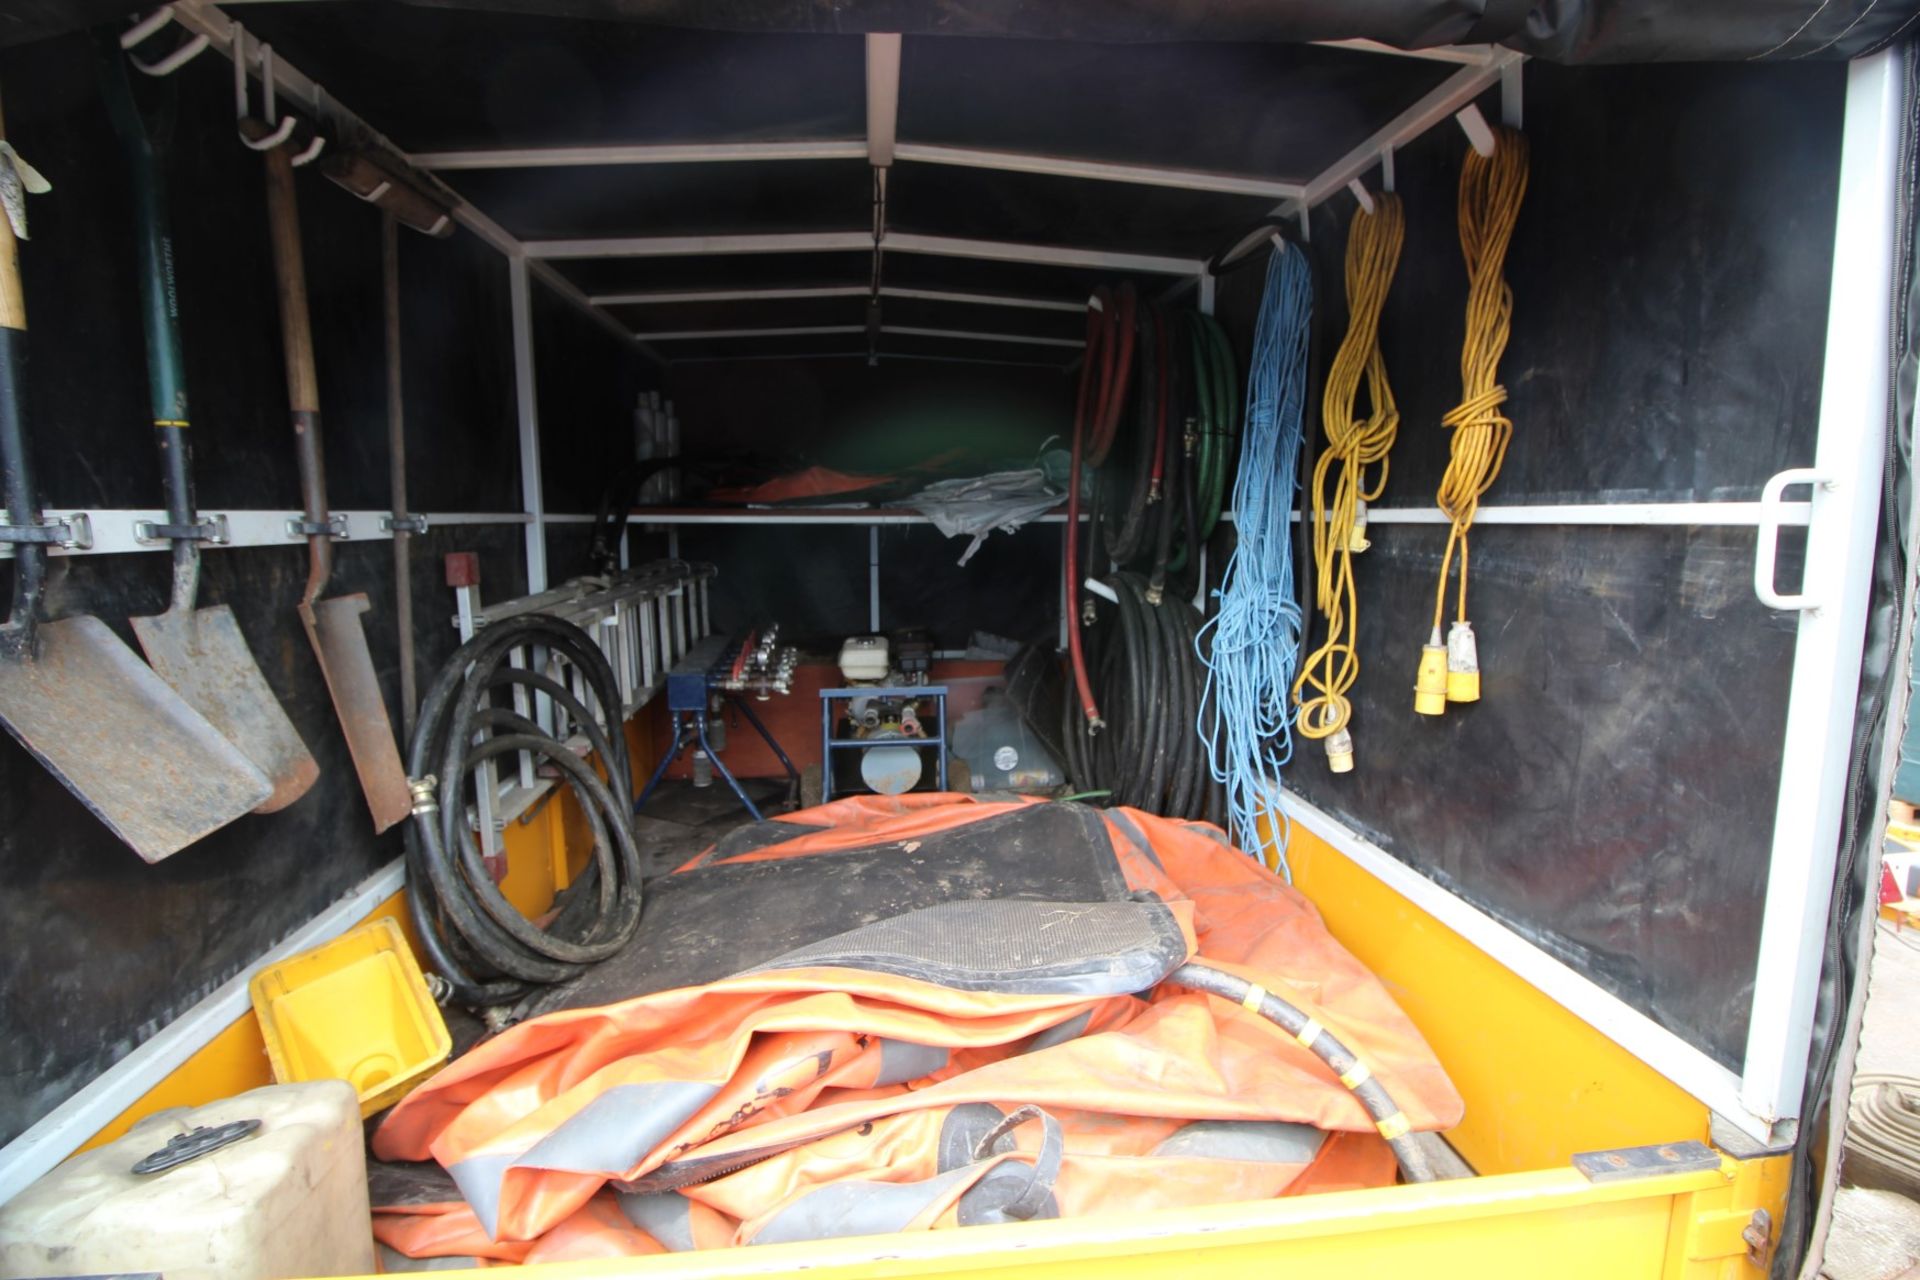 AIRBAG LIFT KIT ON TRIPLE AXLE TRAILER INC. LARGE ORANGE AIRBAGS, COMPRESSOR POWERED BY PETROL - Image 2 of 2